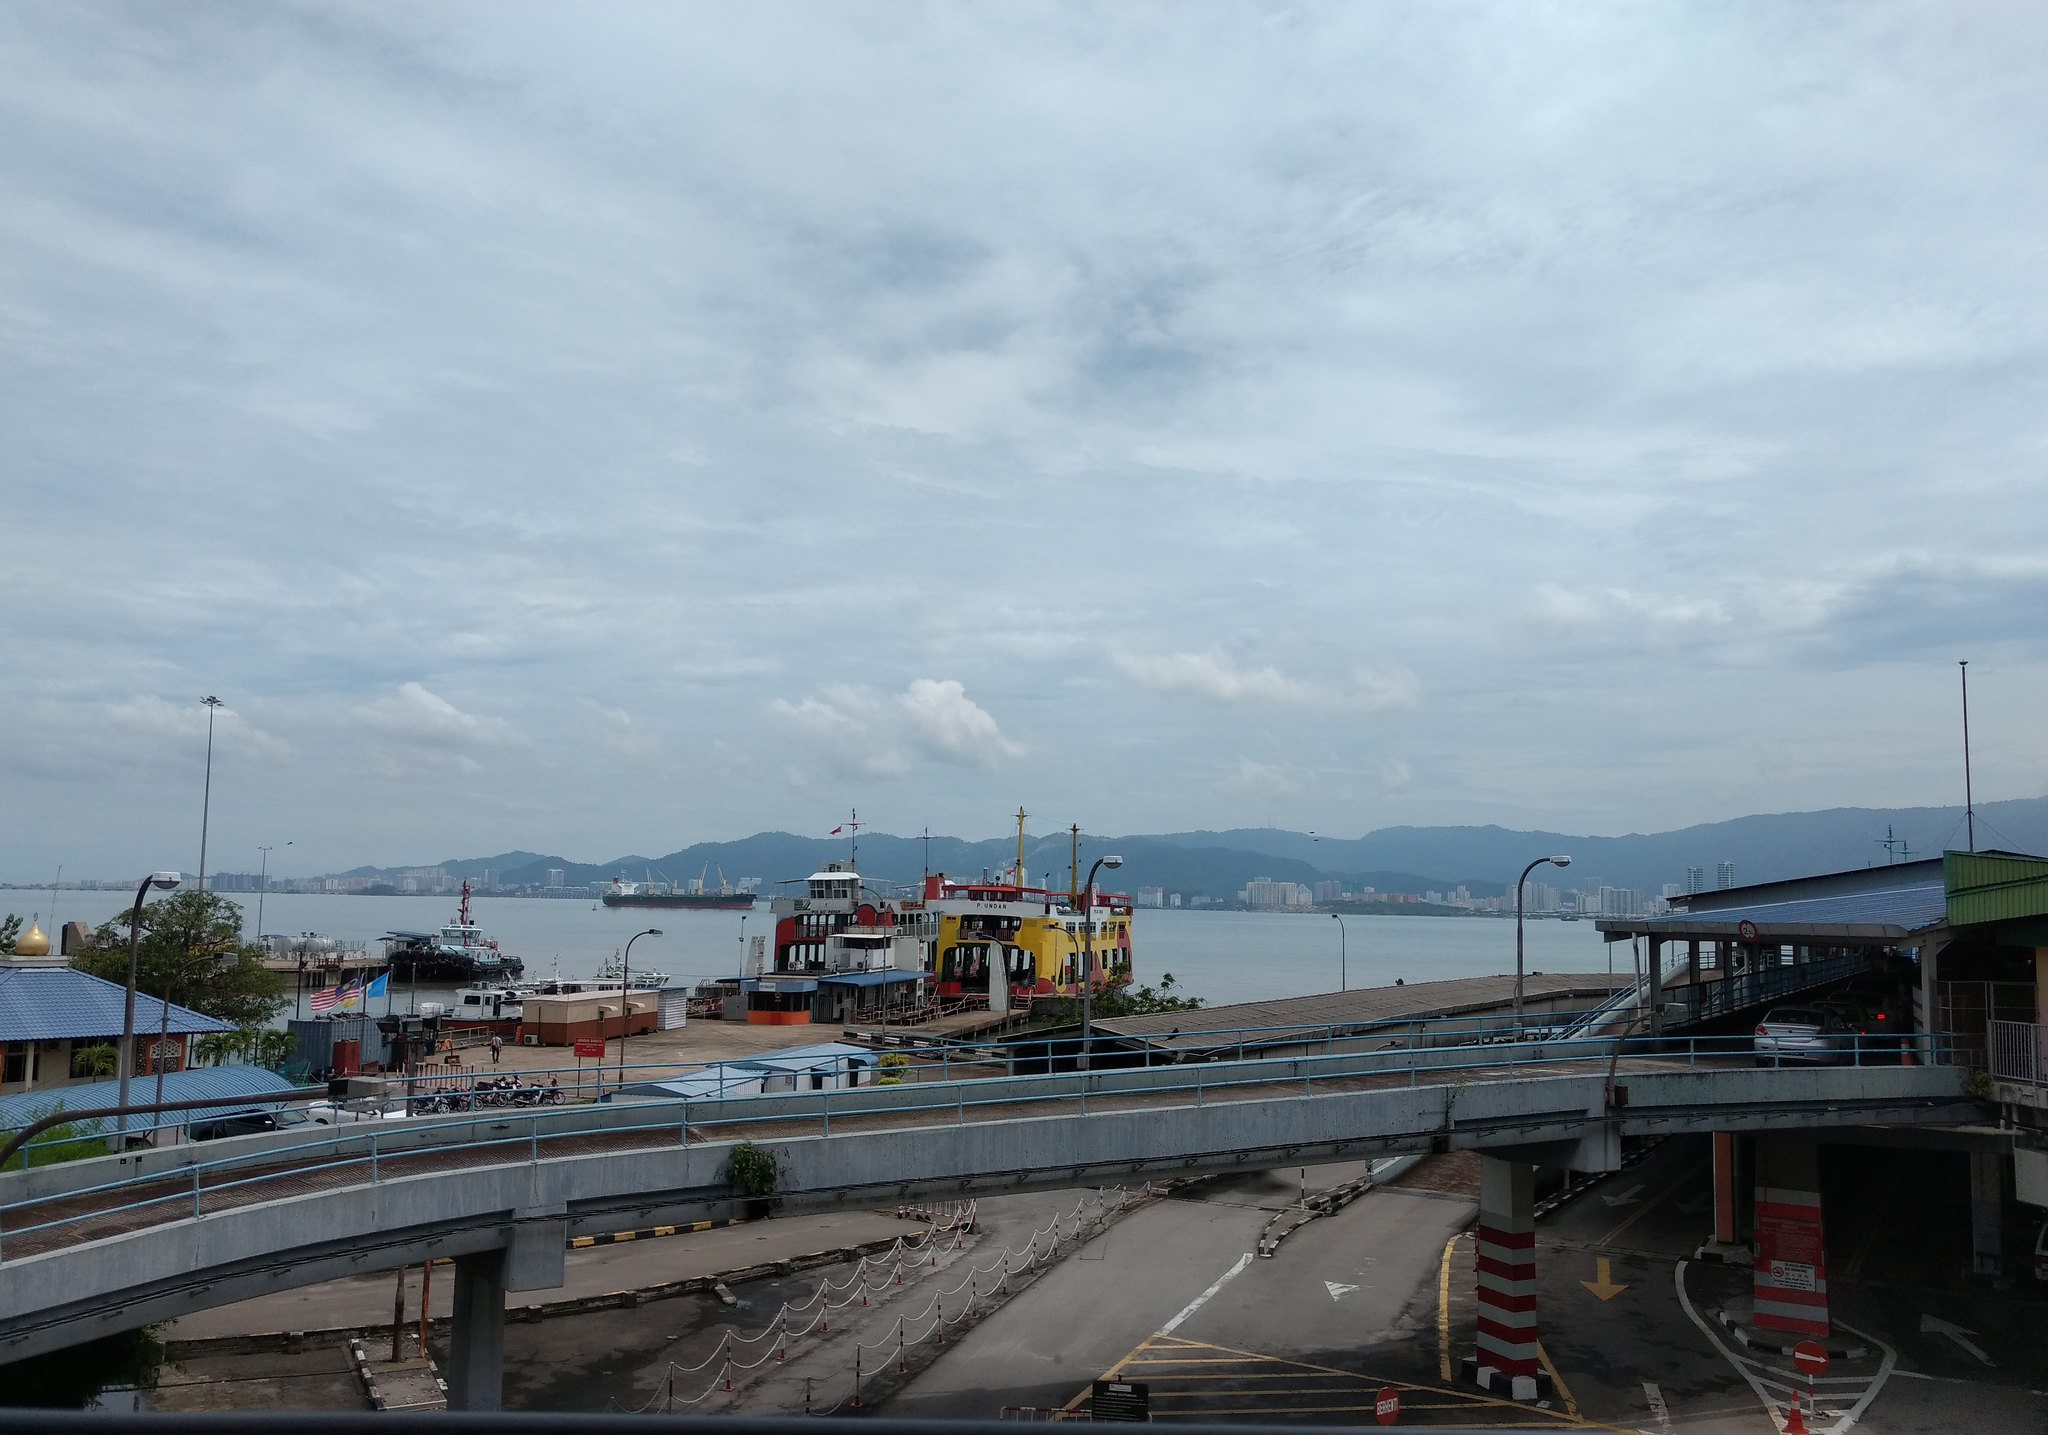 The approaches to the ferry from the station and outside, Butterworth - Penang